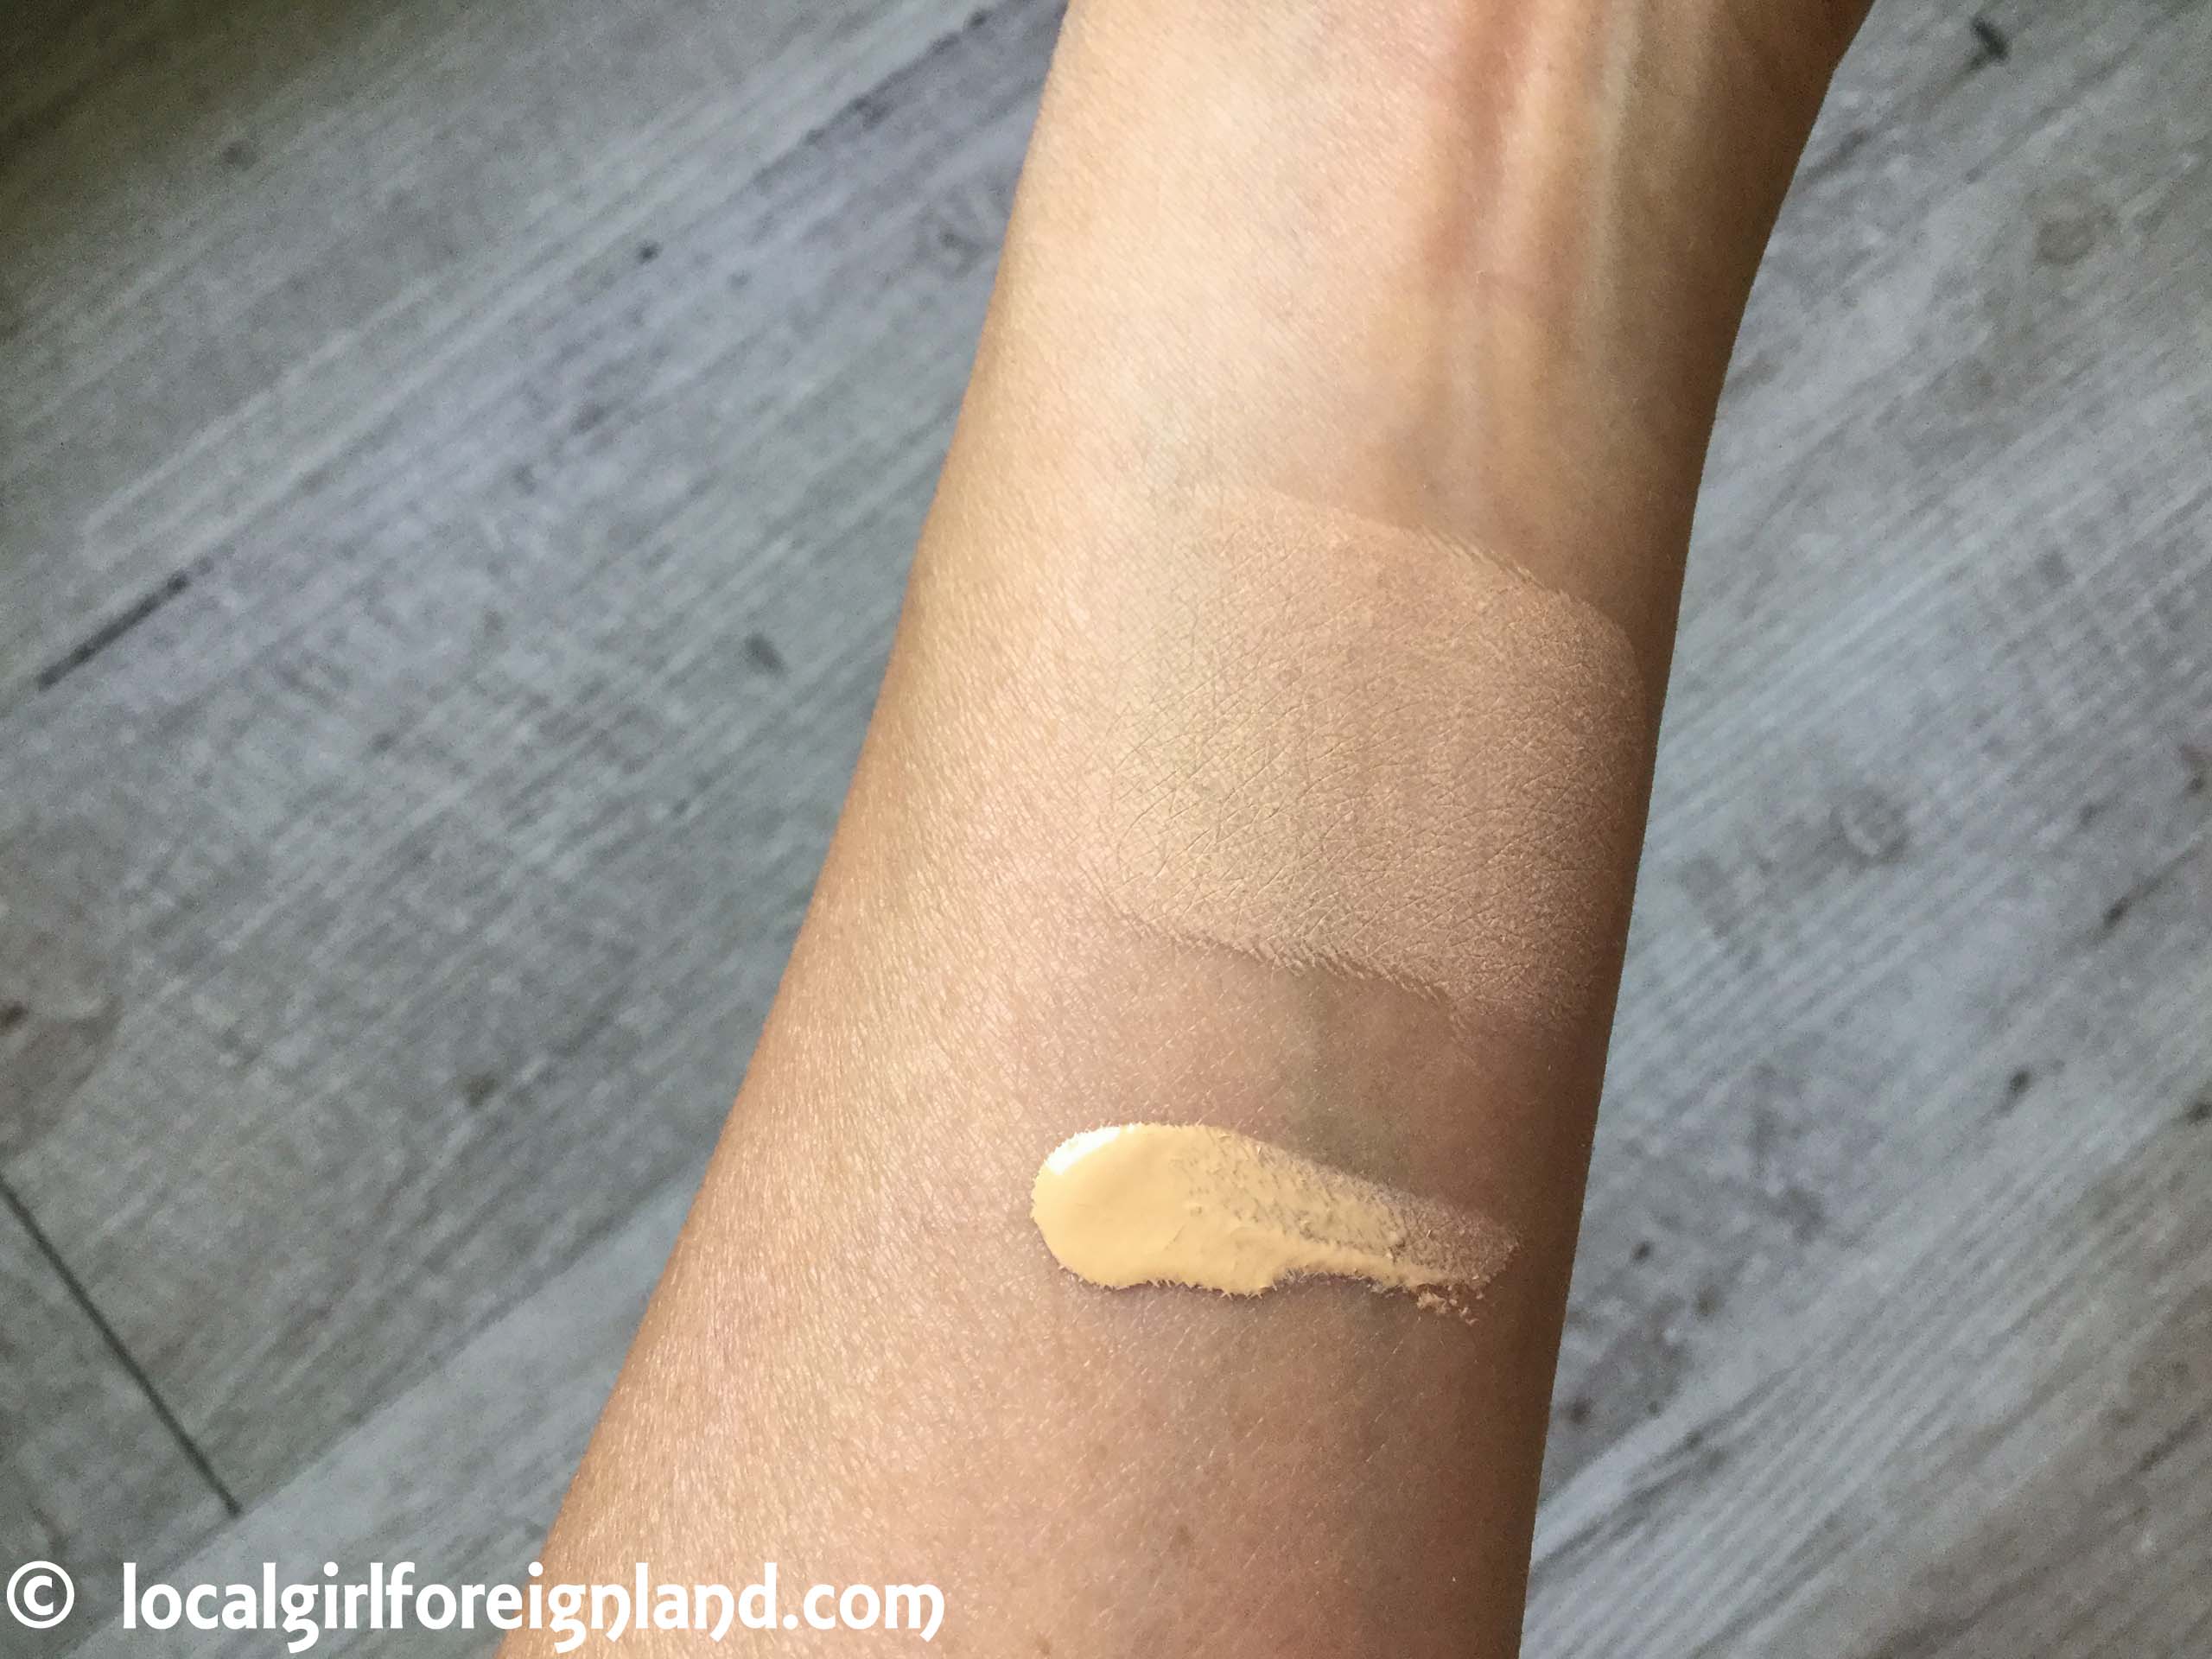 Dior backstage face and body foundation W1 wet vs dry swatch